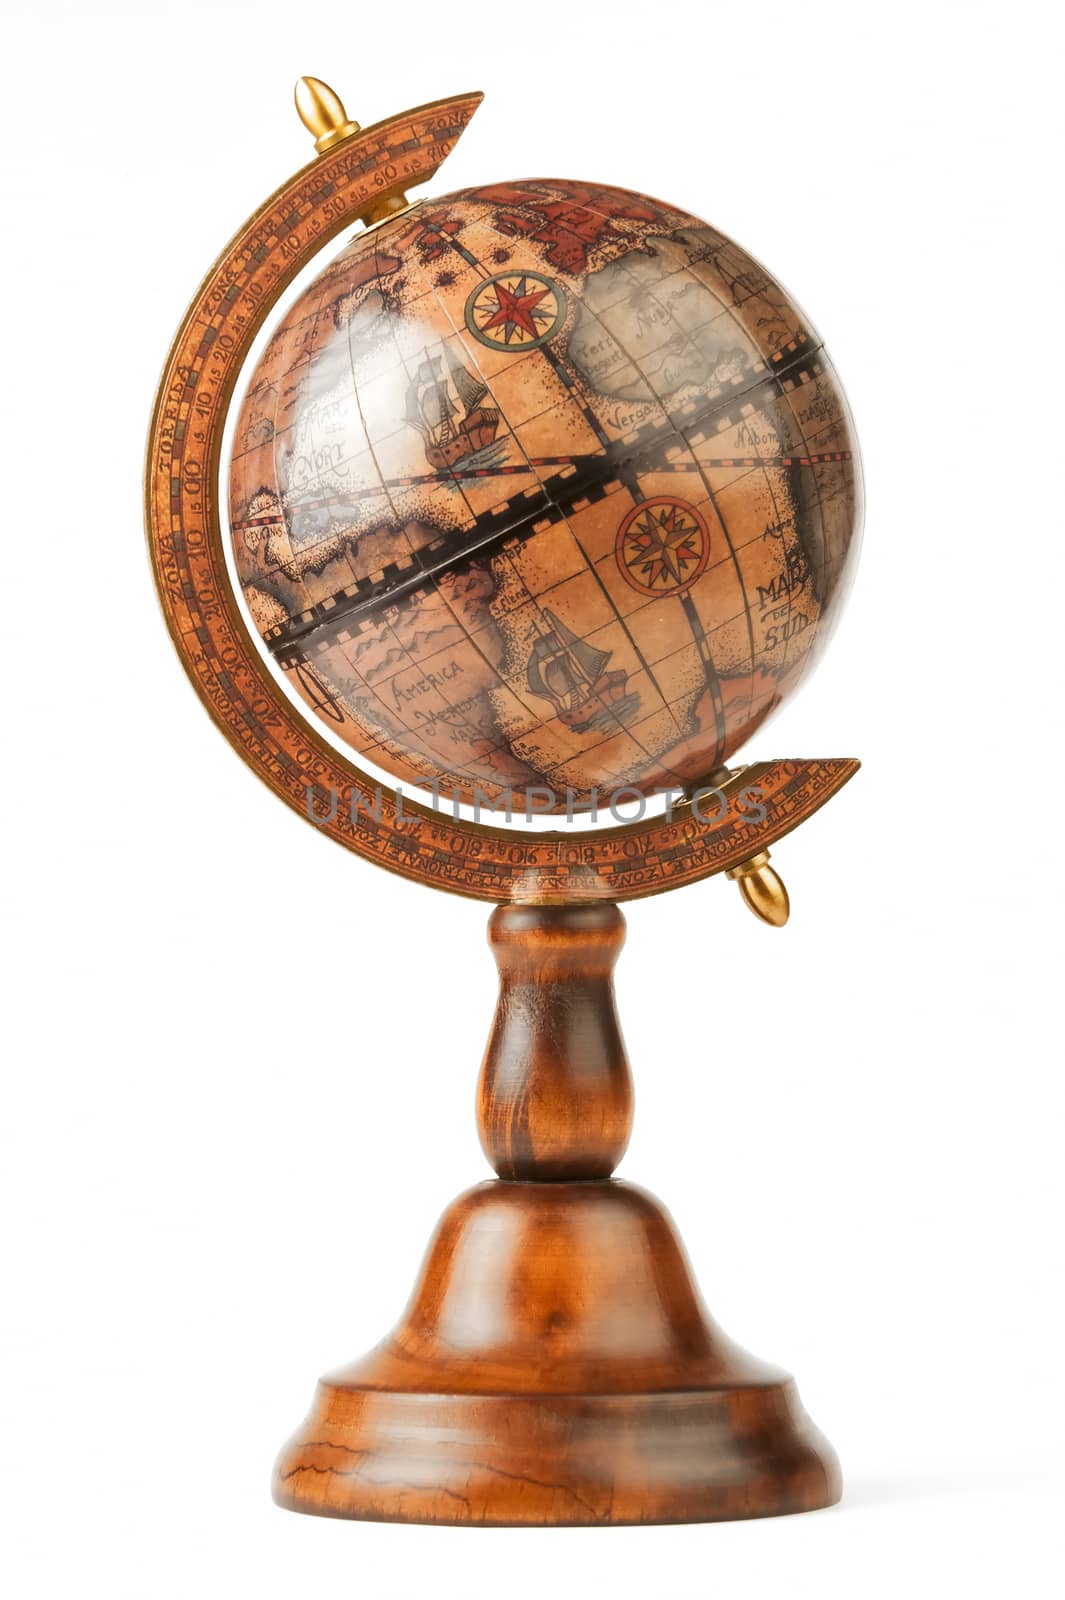 The vintage globe, separately on a white background